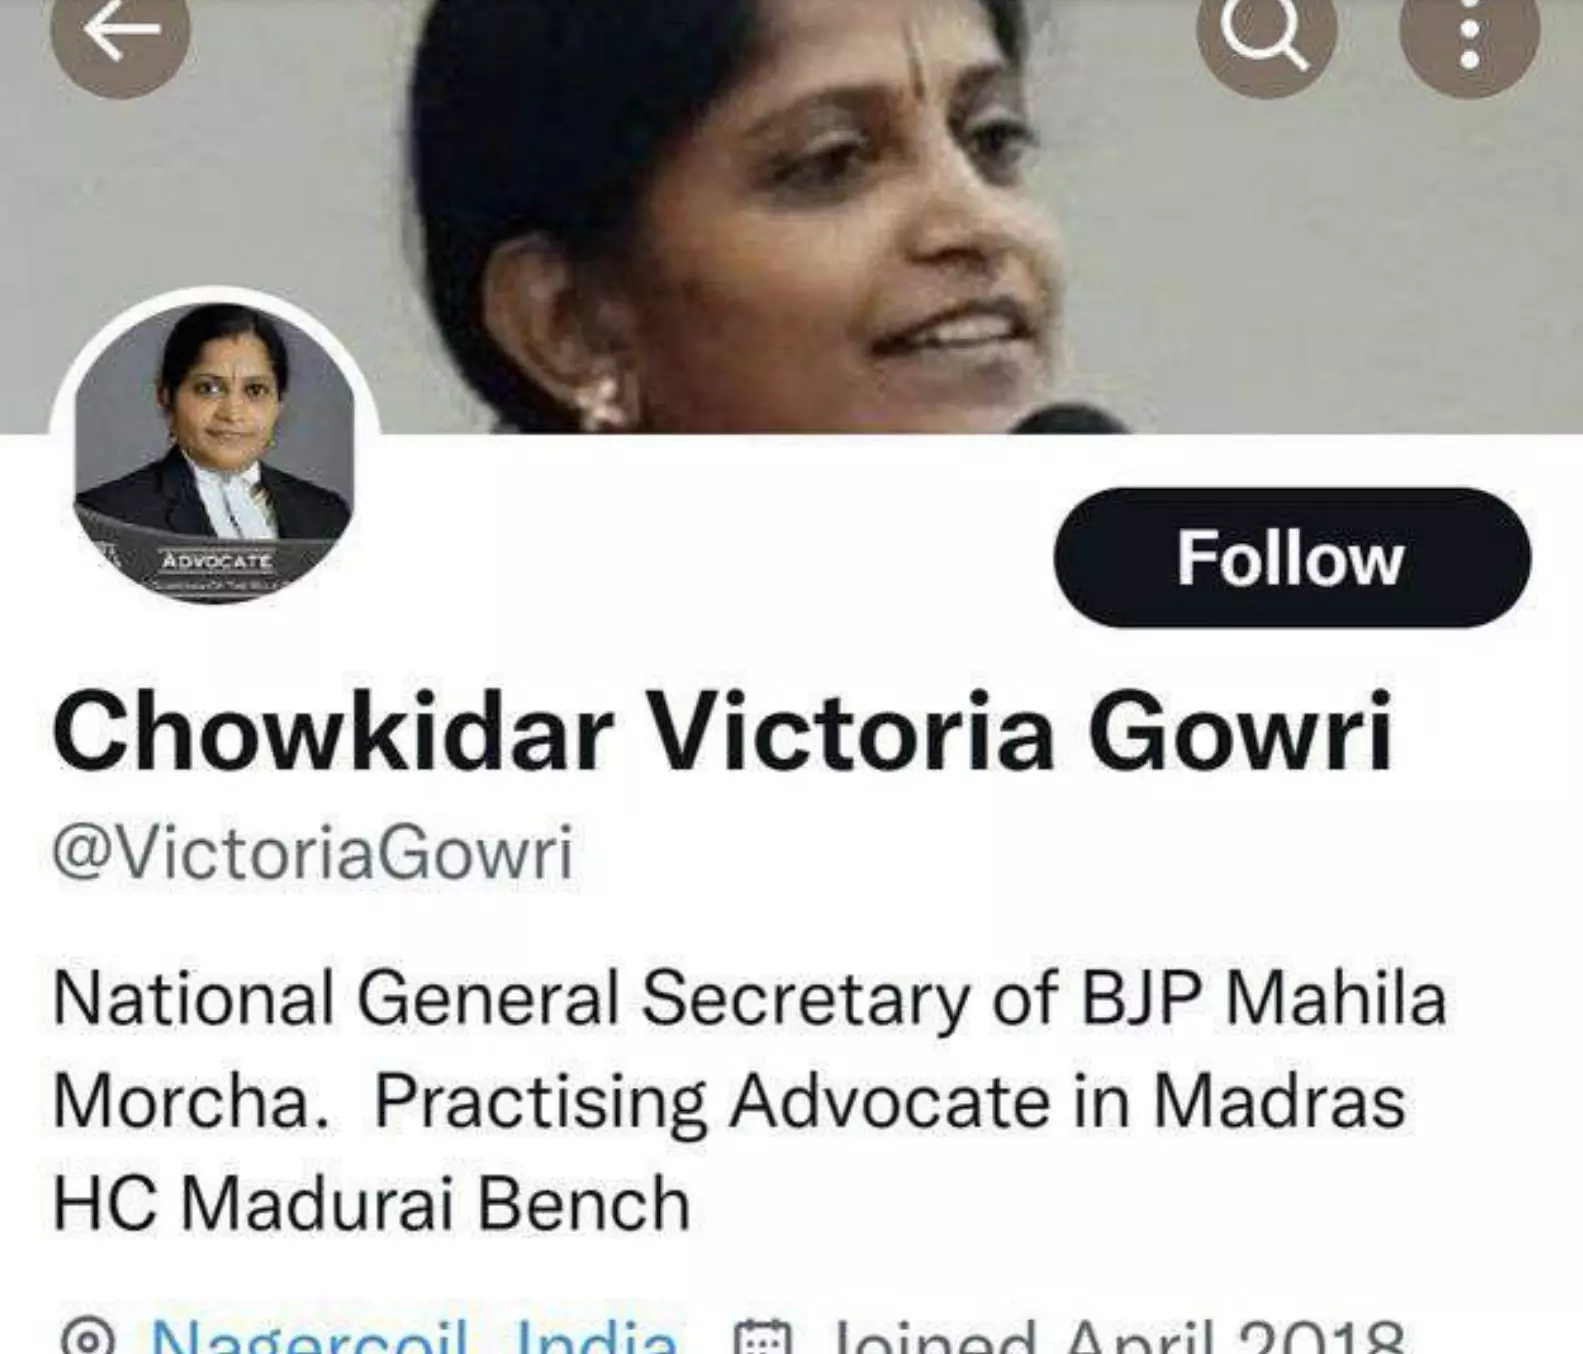 Screenshot of purported Twitter account of Victoria Gowri (now deactivated), which has been annexed in the representation.